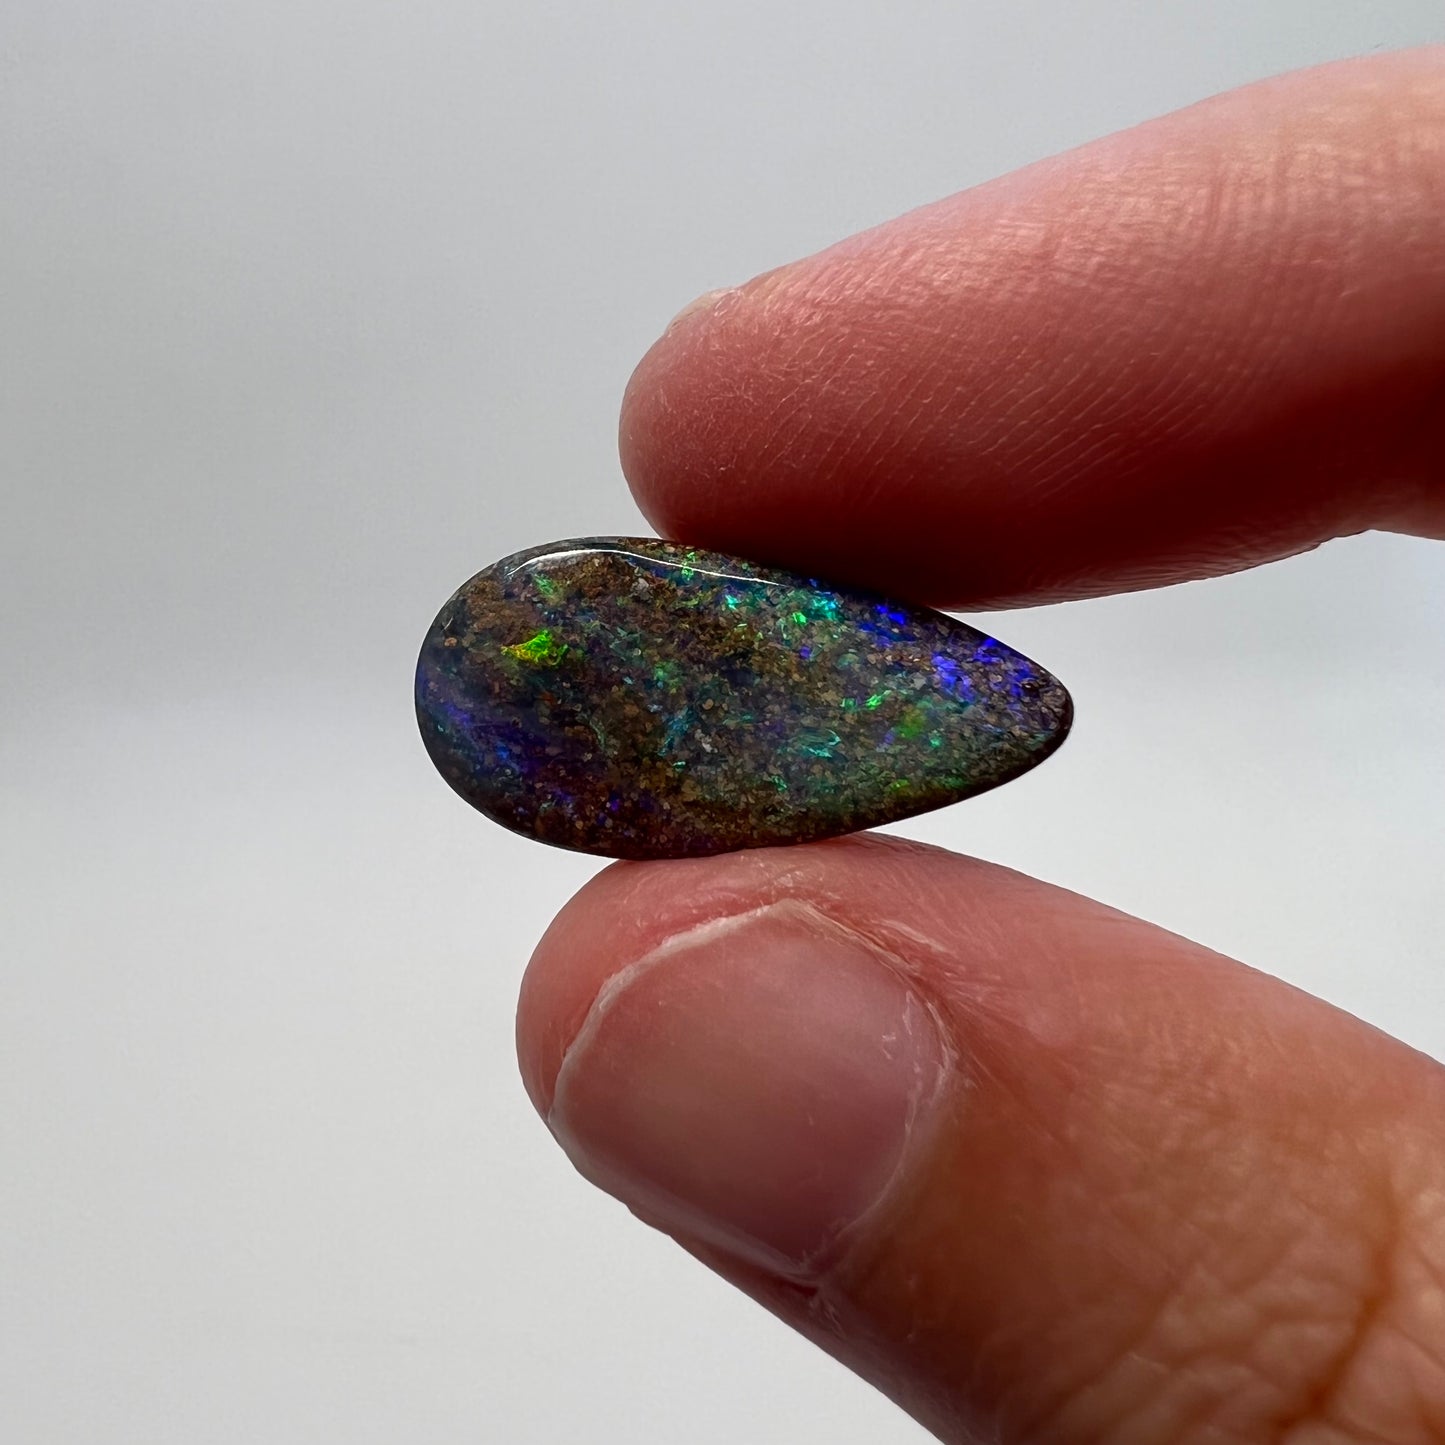 6.09 Ct green and purple boulder opal